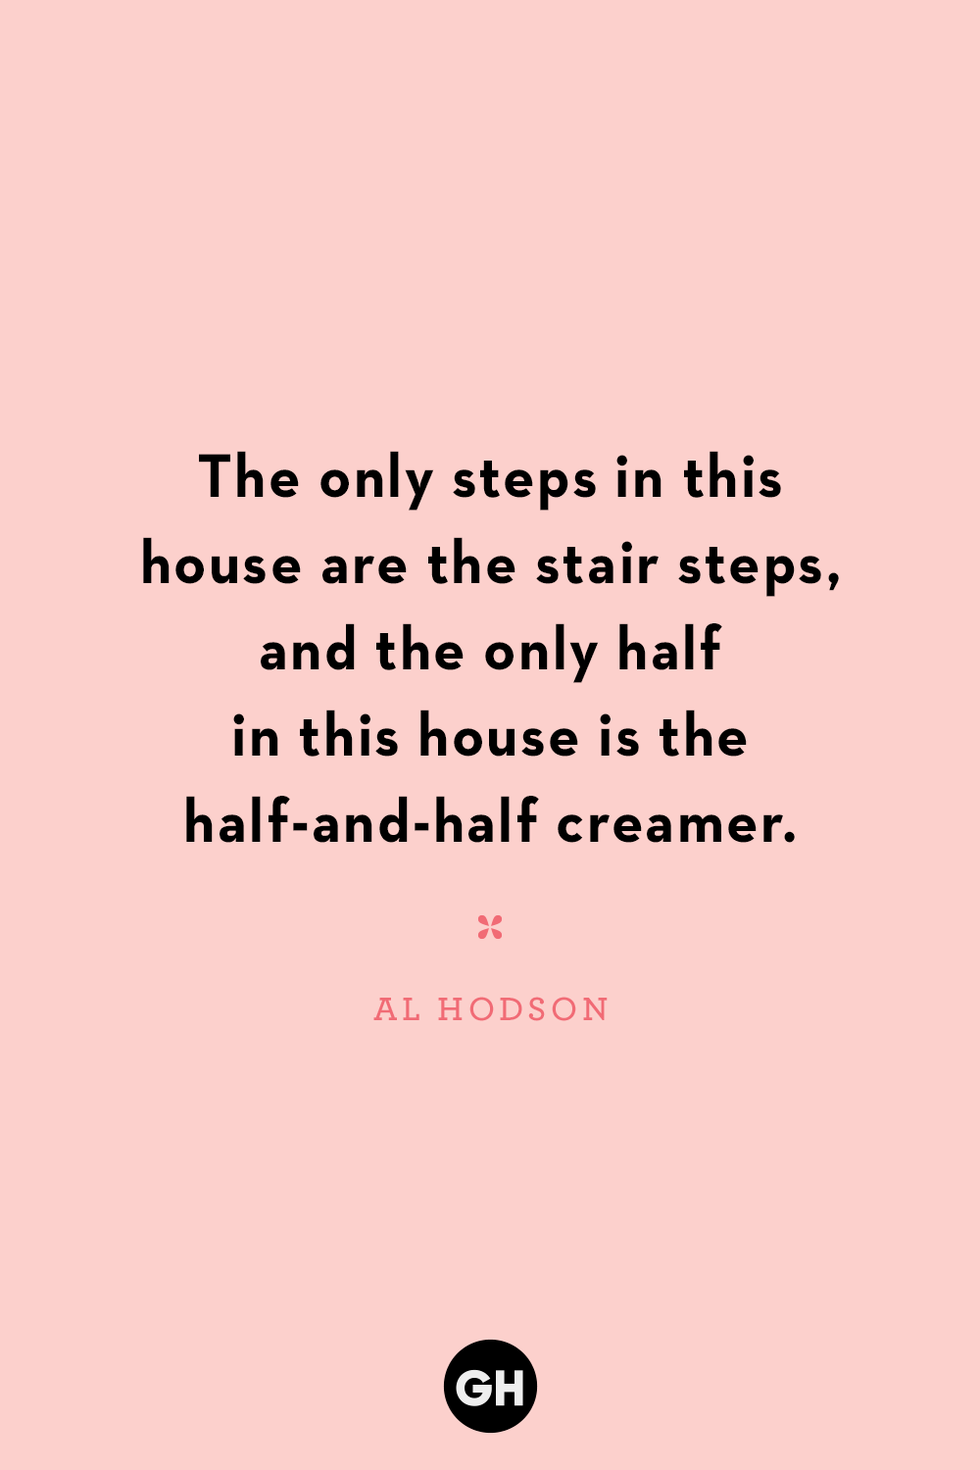 stepmom quote from al hodson